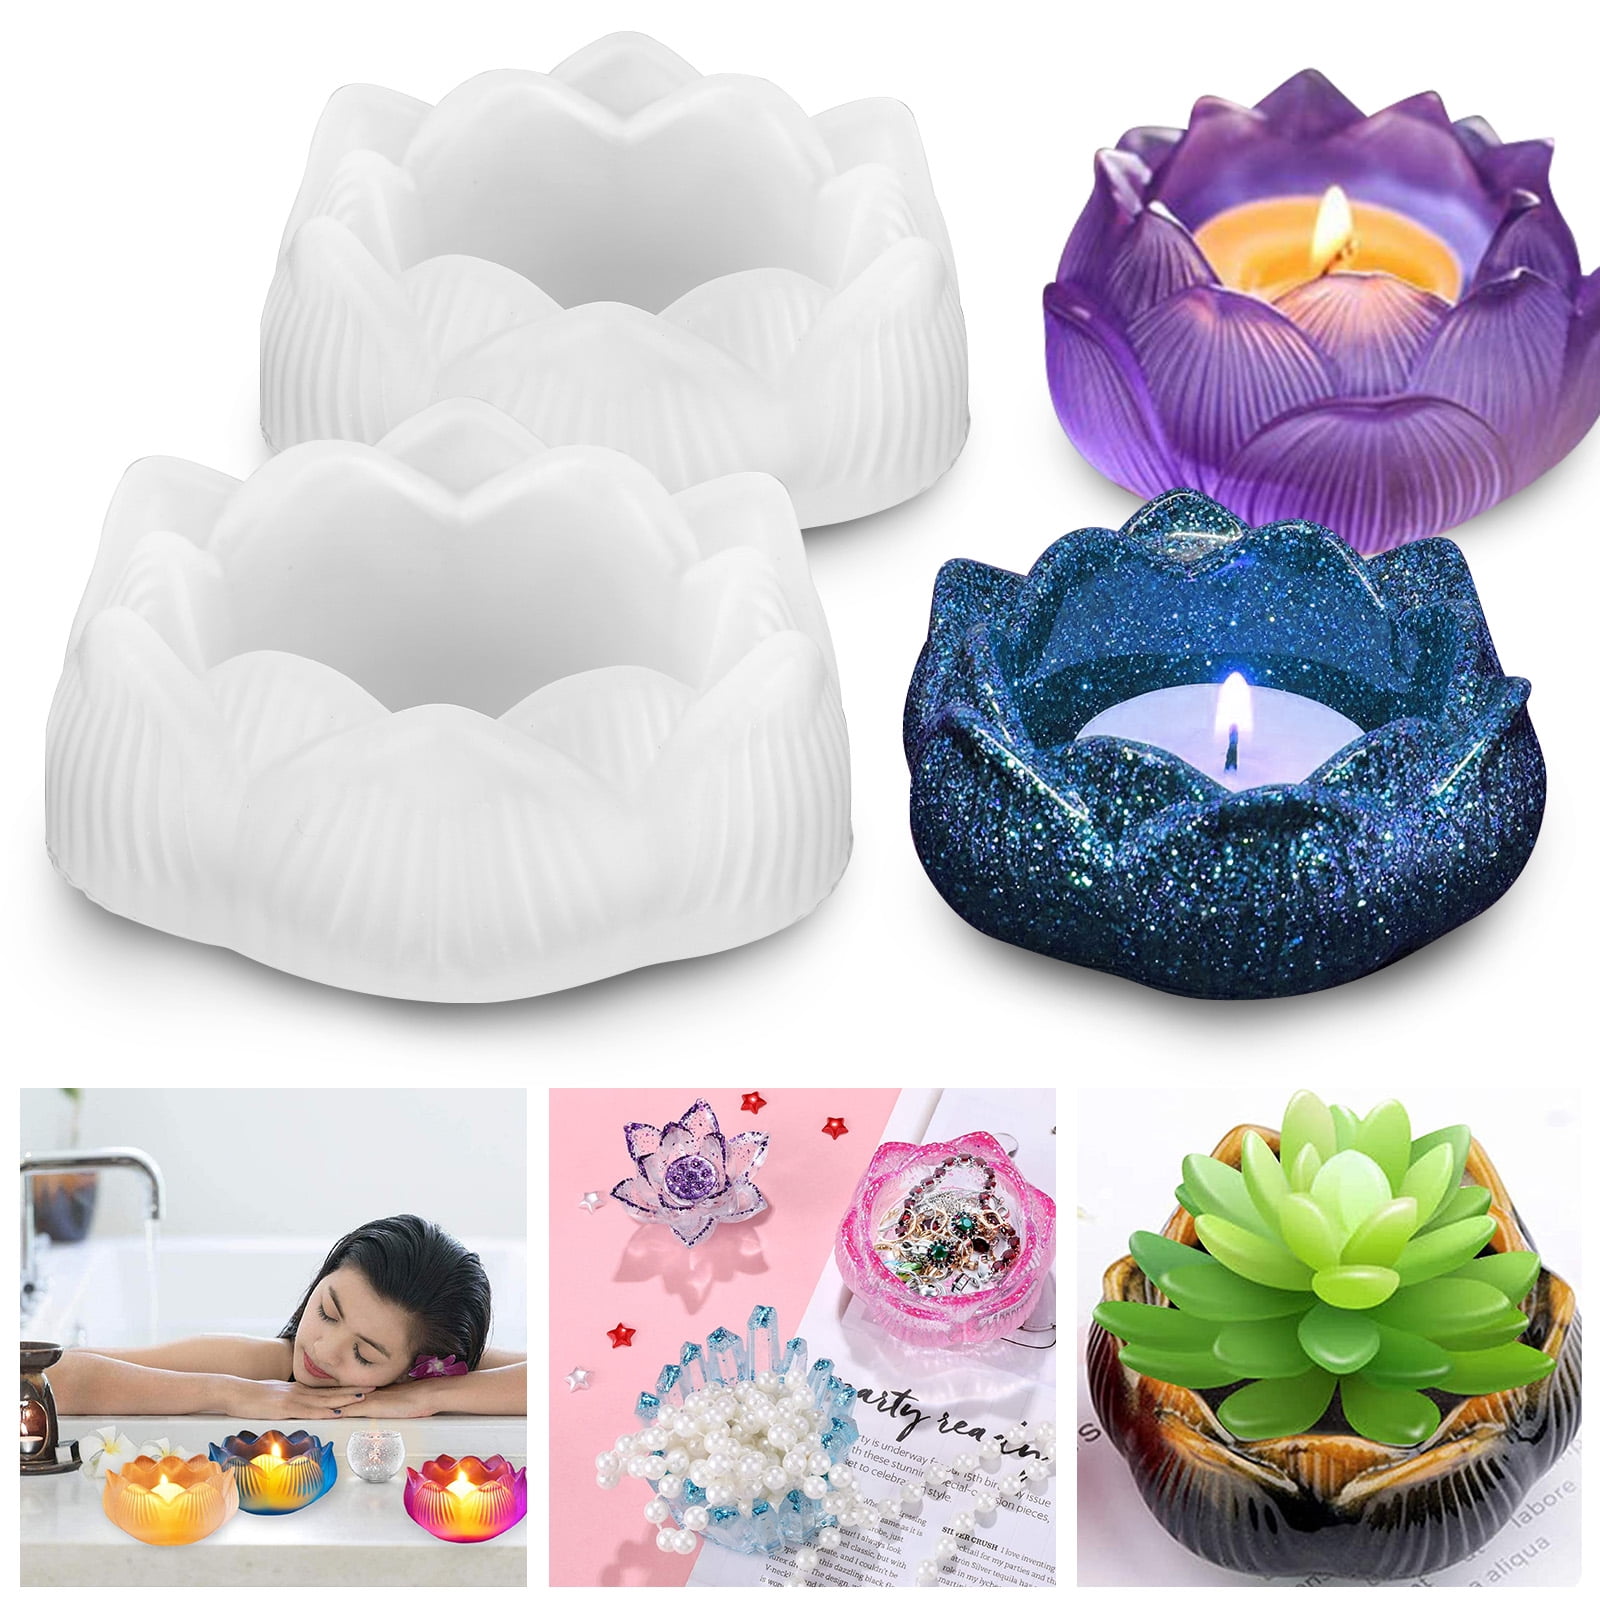 DIY Silicone Bowl Making Jewelry Candles Plate Resin Casting Mold From  Funoutdoor, $2.07